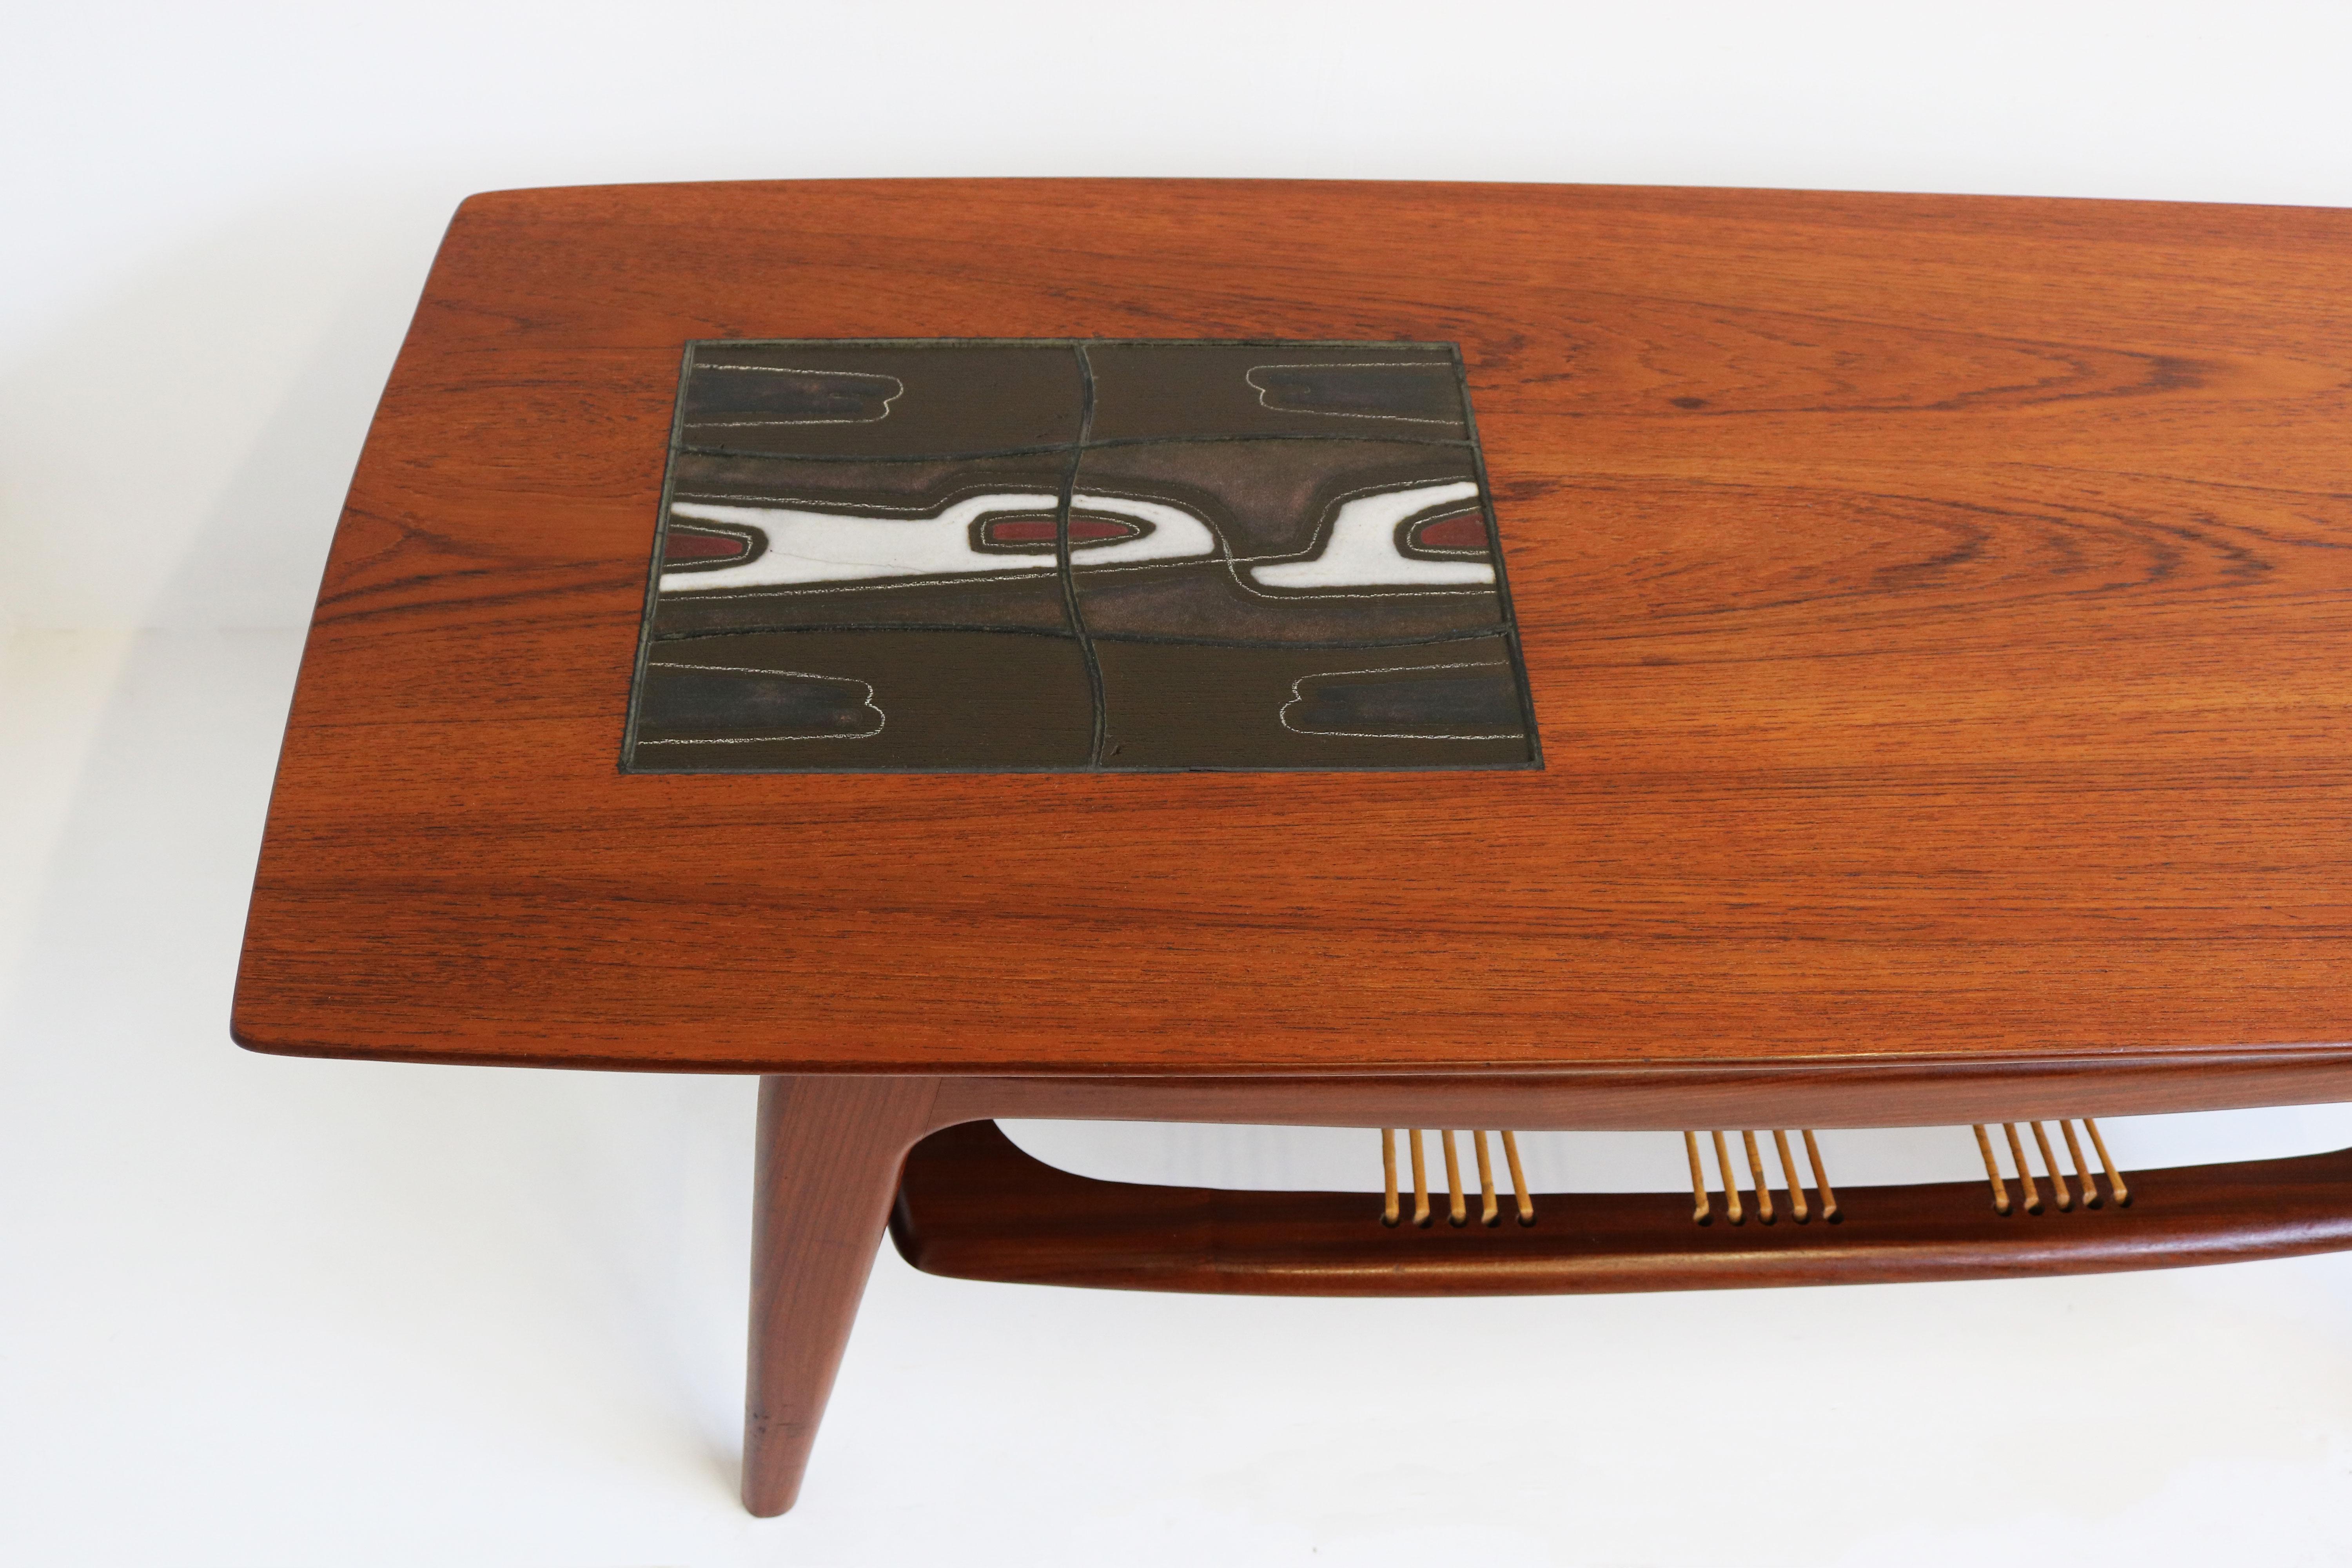 Dutch Mid-Century Modern design coffee table by Louis Van Teeffelen for Webe 1950. 
His most desired coffee table design with the unique combination of Teak , Rattan & Ceramic art. 
Gorgeous organic sculpted teak frame with original rattan